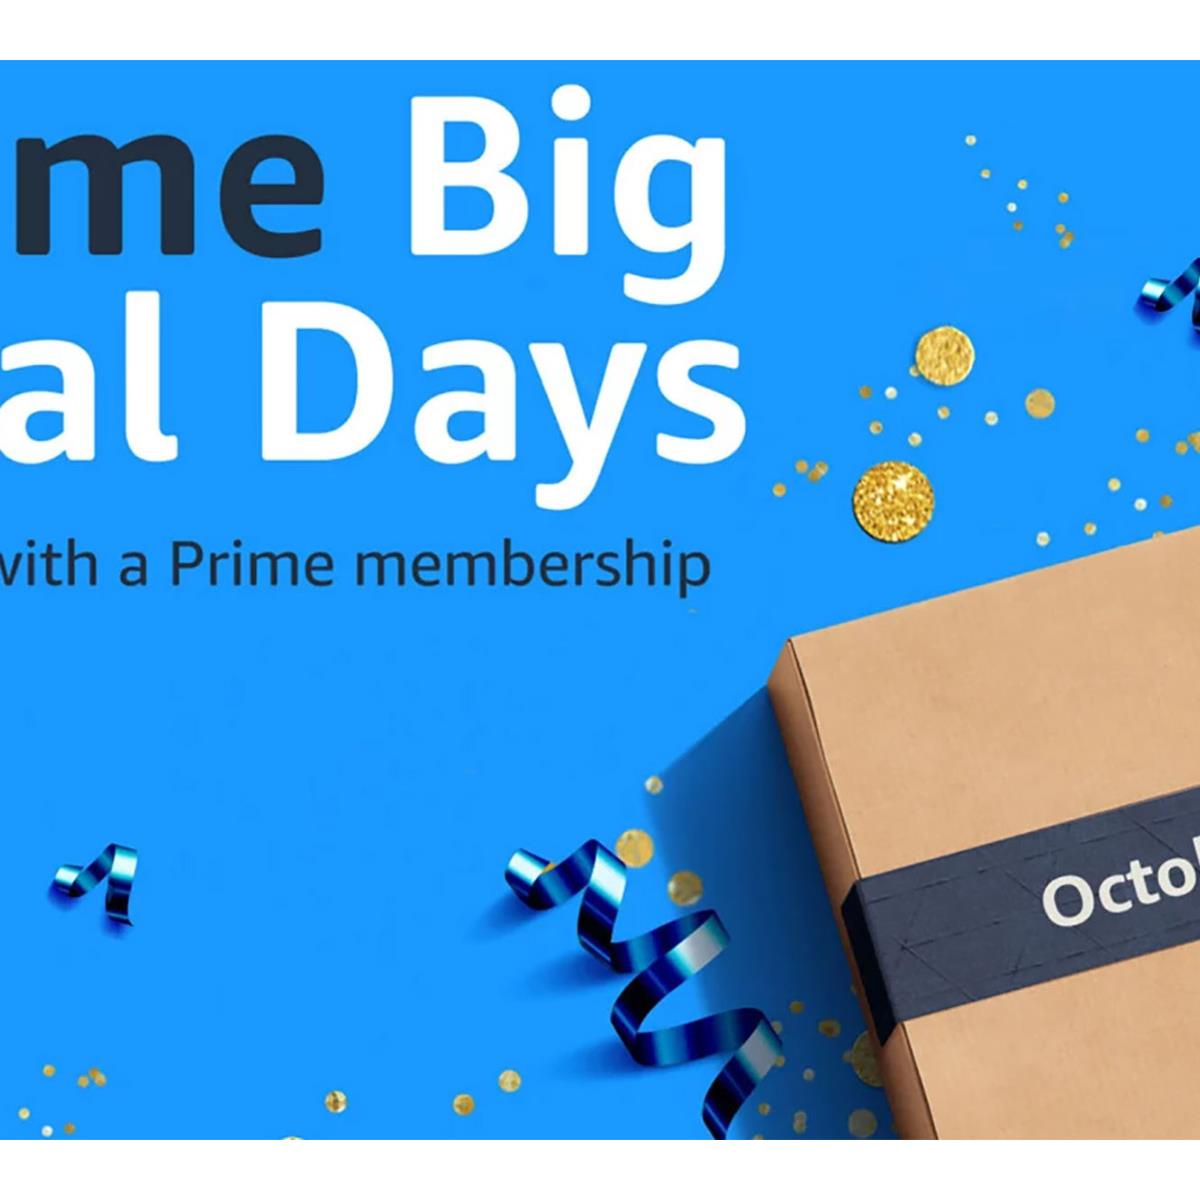 home goods discounted up to 55% off on Prime Day